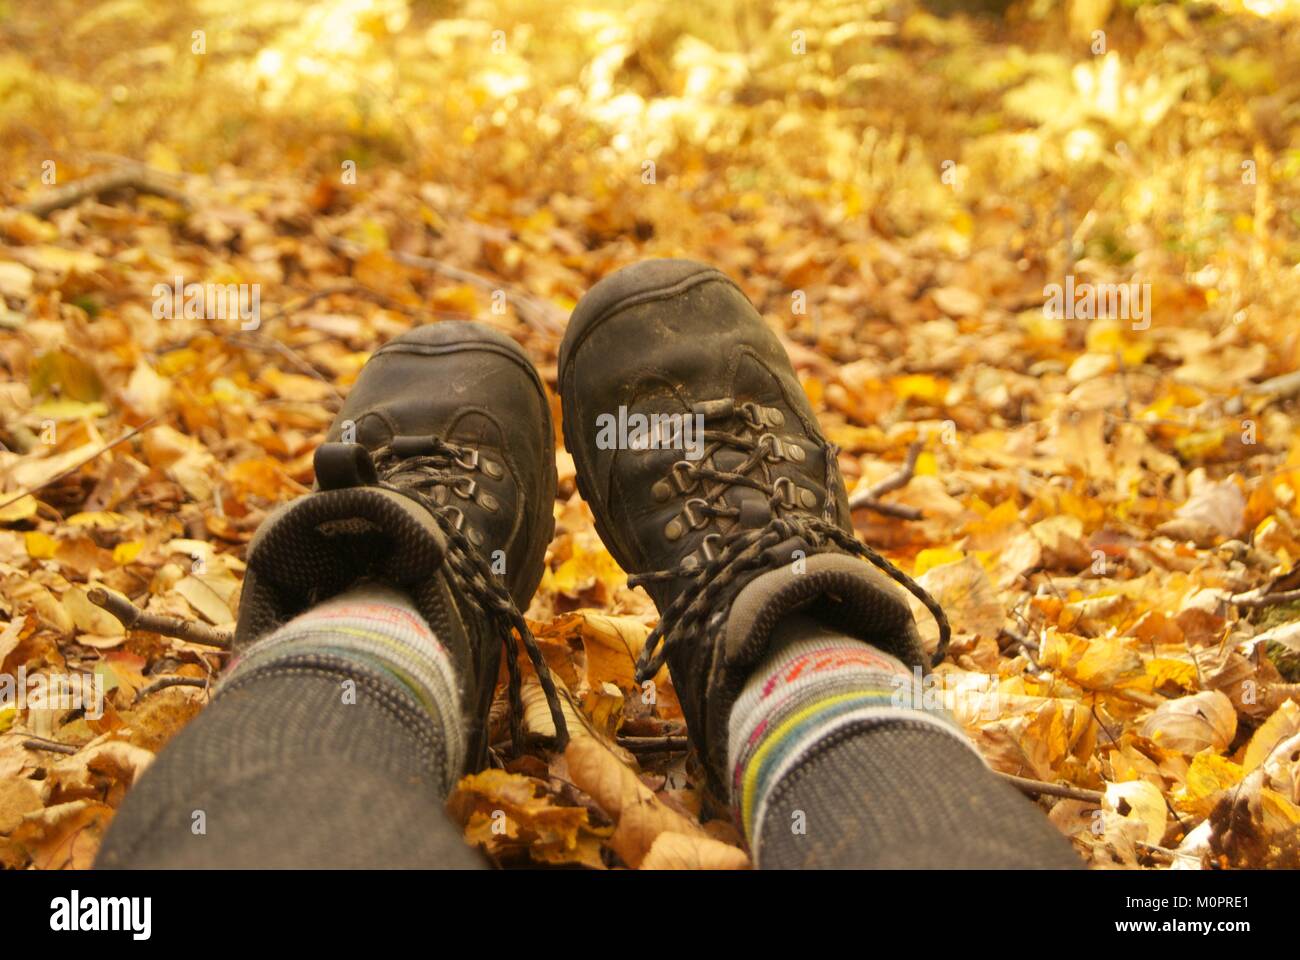 Walking in the forest in Fall : Feet and legs wearing hiking boots with golden fall leaves on the forest floor Stock Photo